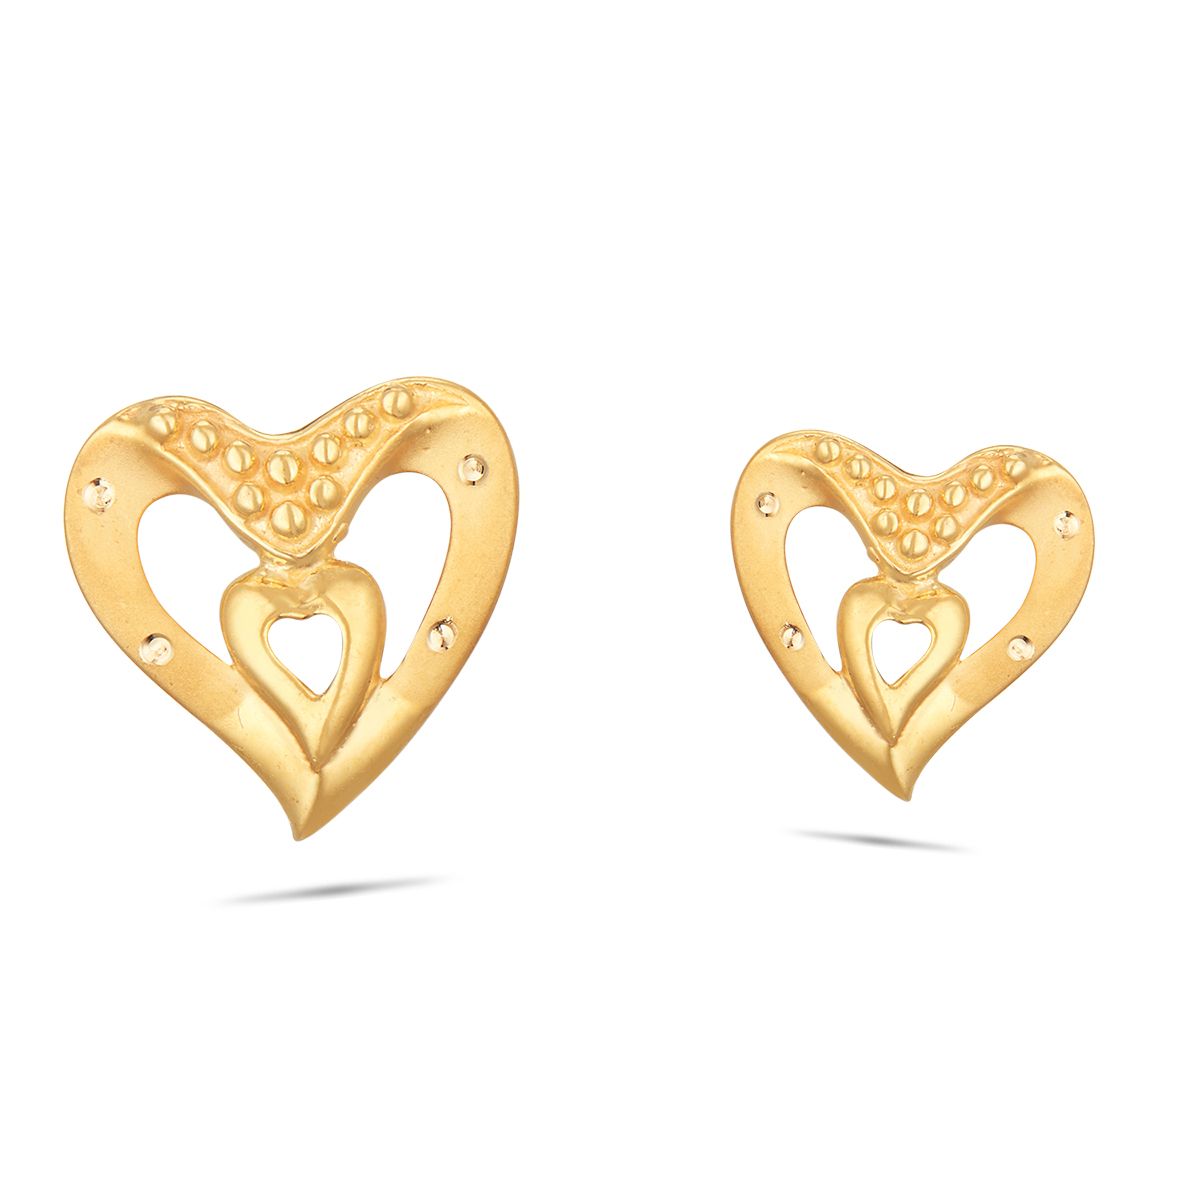 Buy 18k Gold Plated Heart Stud Earrings, Heart Earrings, 925 Sterling  Silver Earrings, Cz Earrings, Gold Earrings, Perfect Gift for Her Online in  India - Etsy